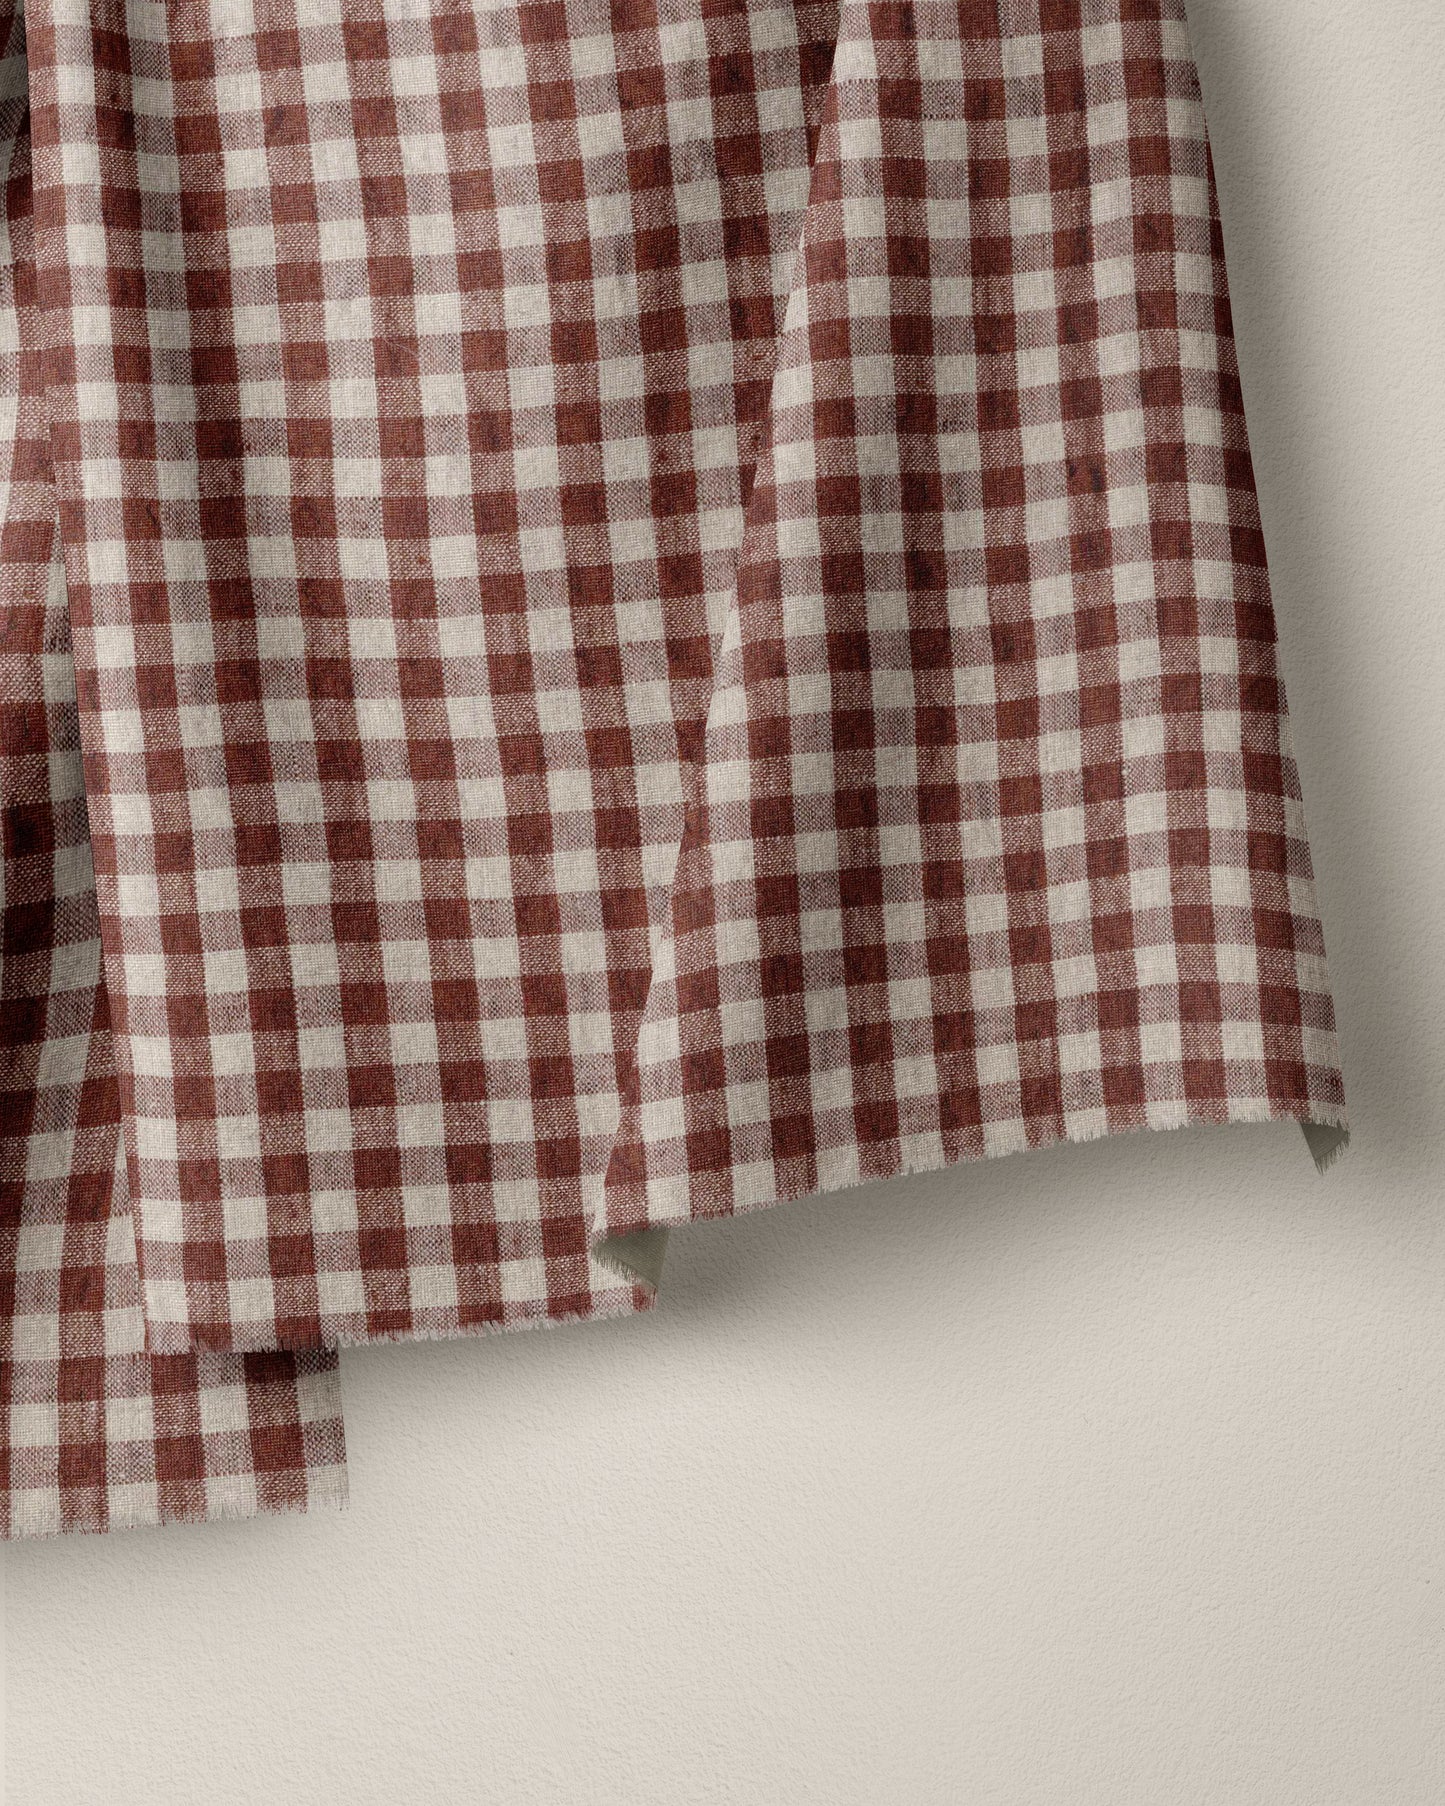 Small Chestnut and Natural Gingham Linen